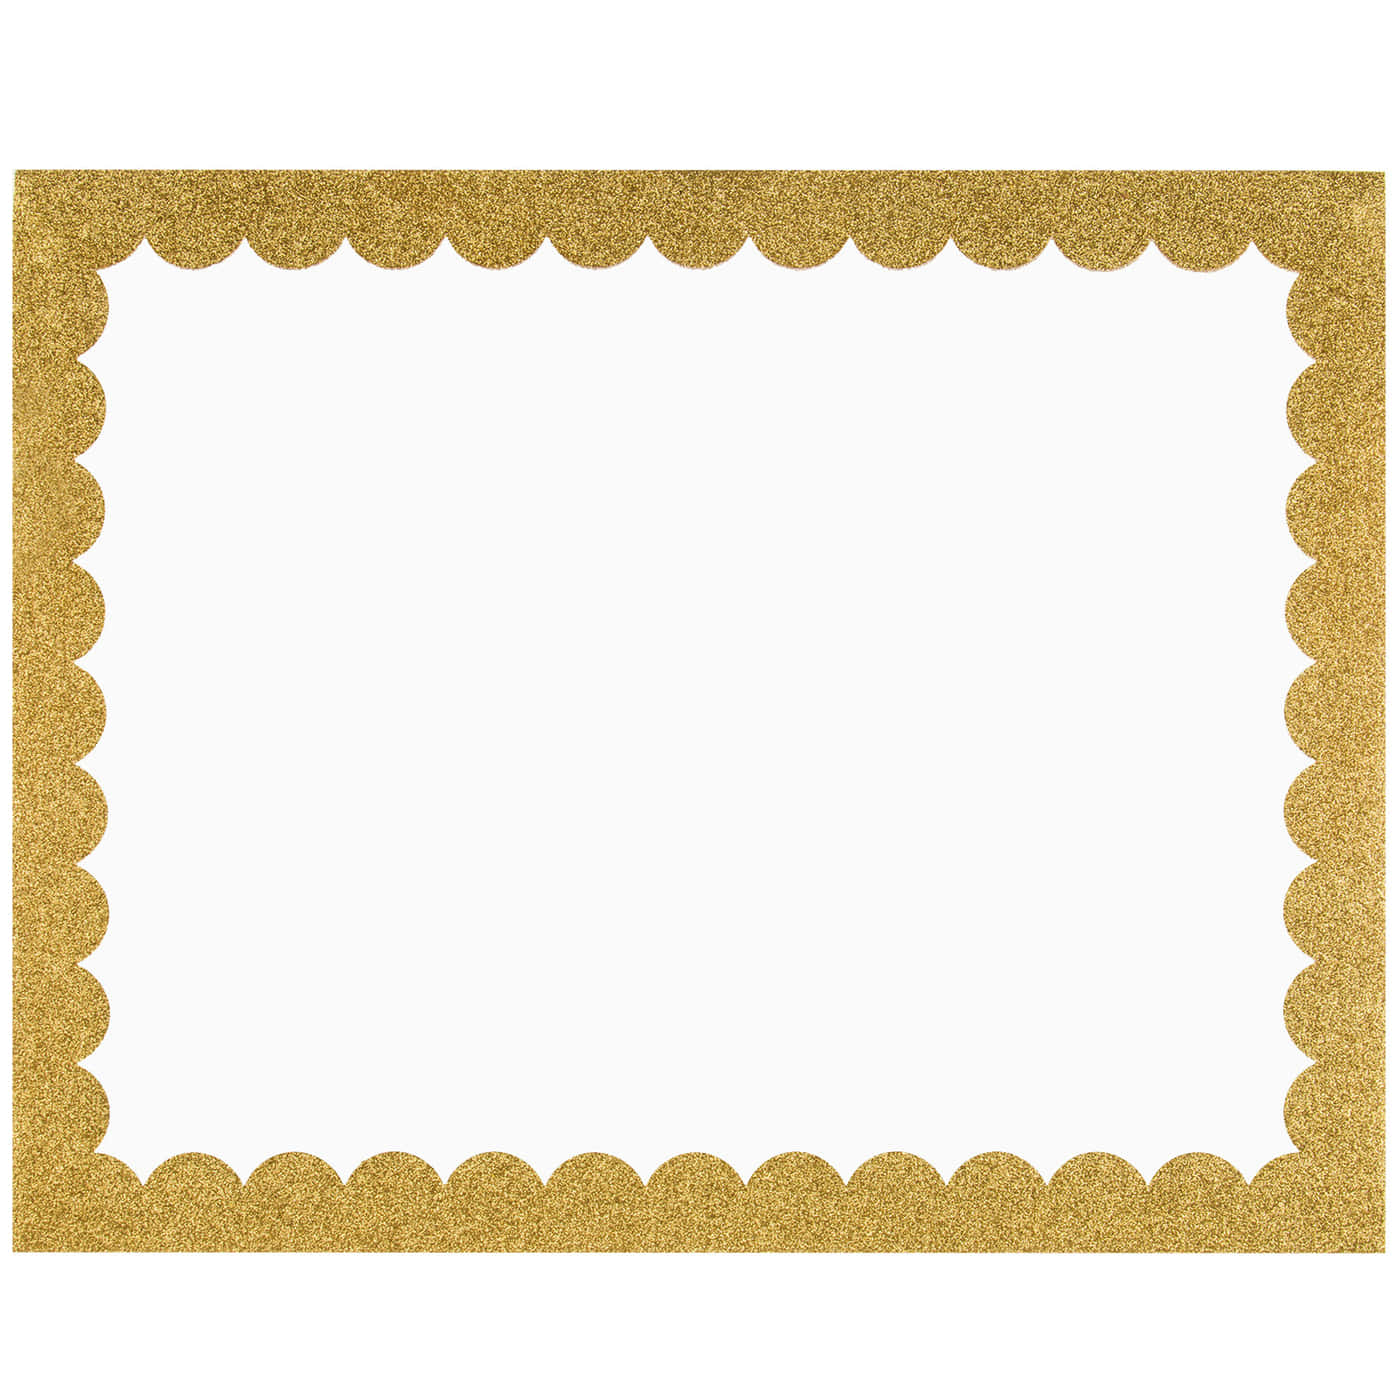 A Gold Scalloped Border On A White Background